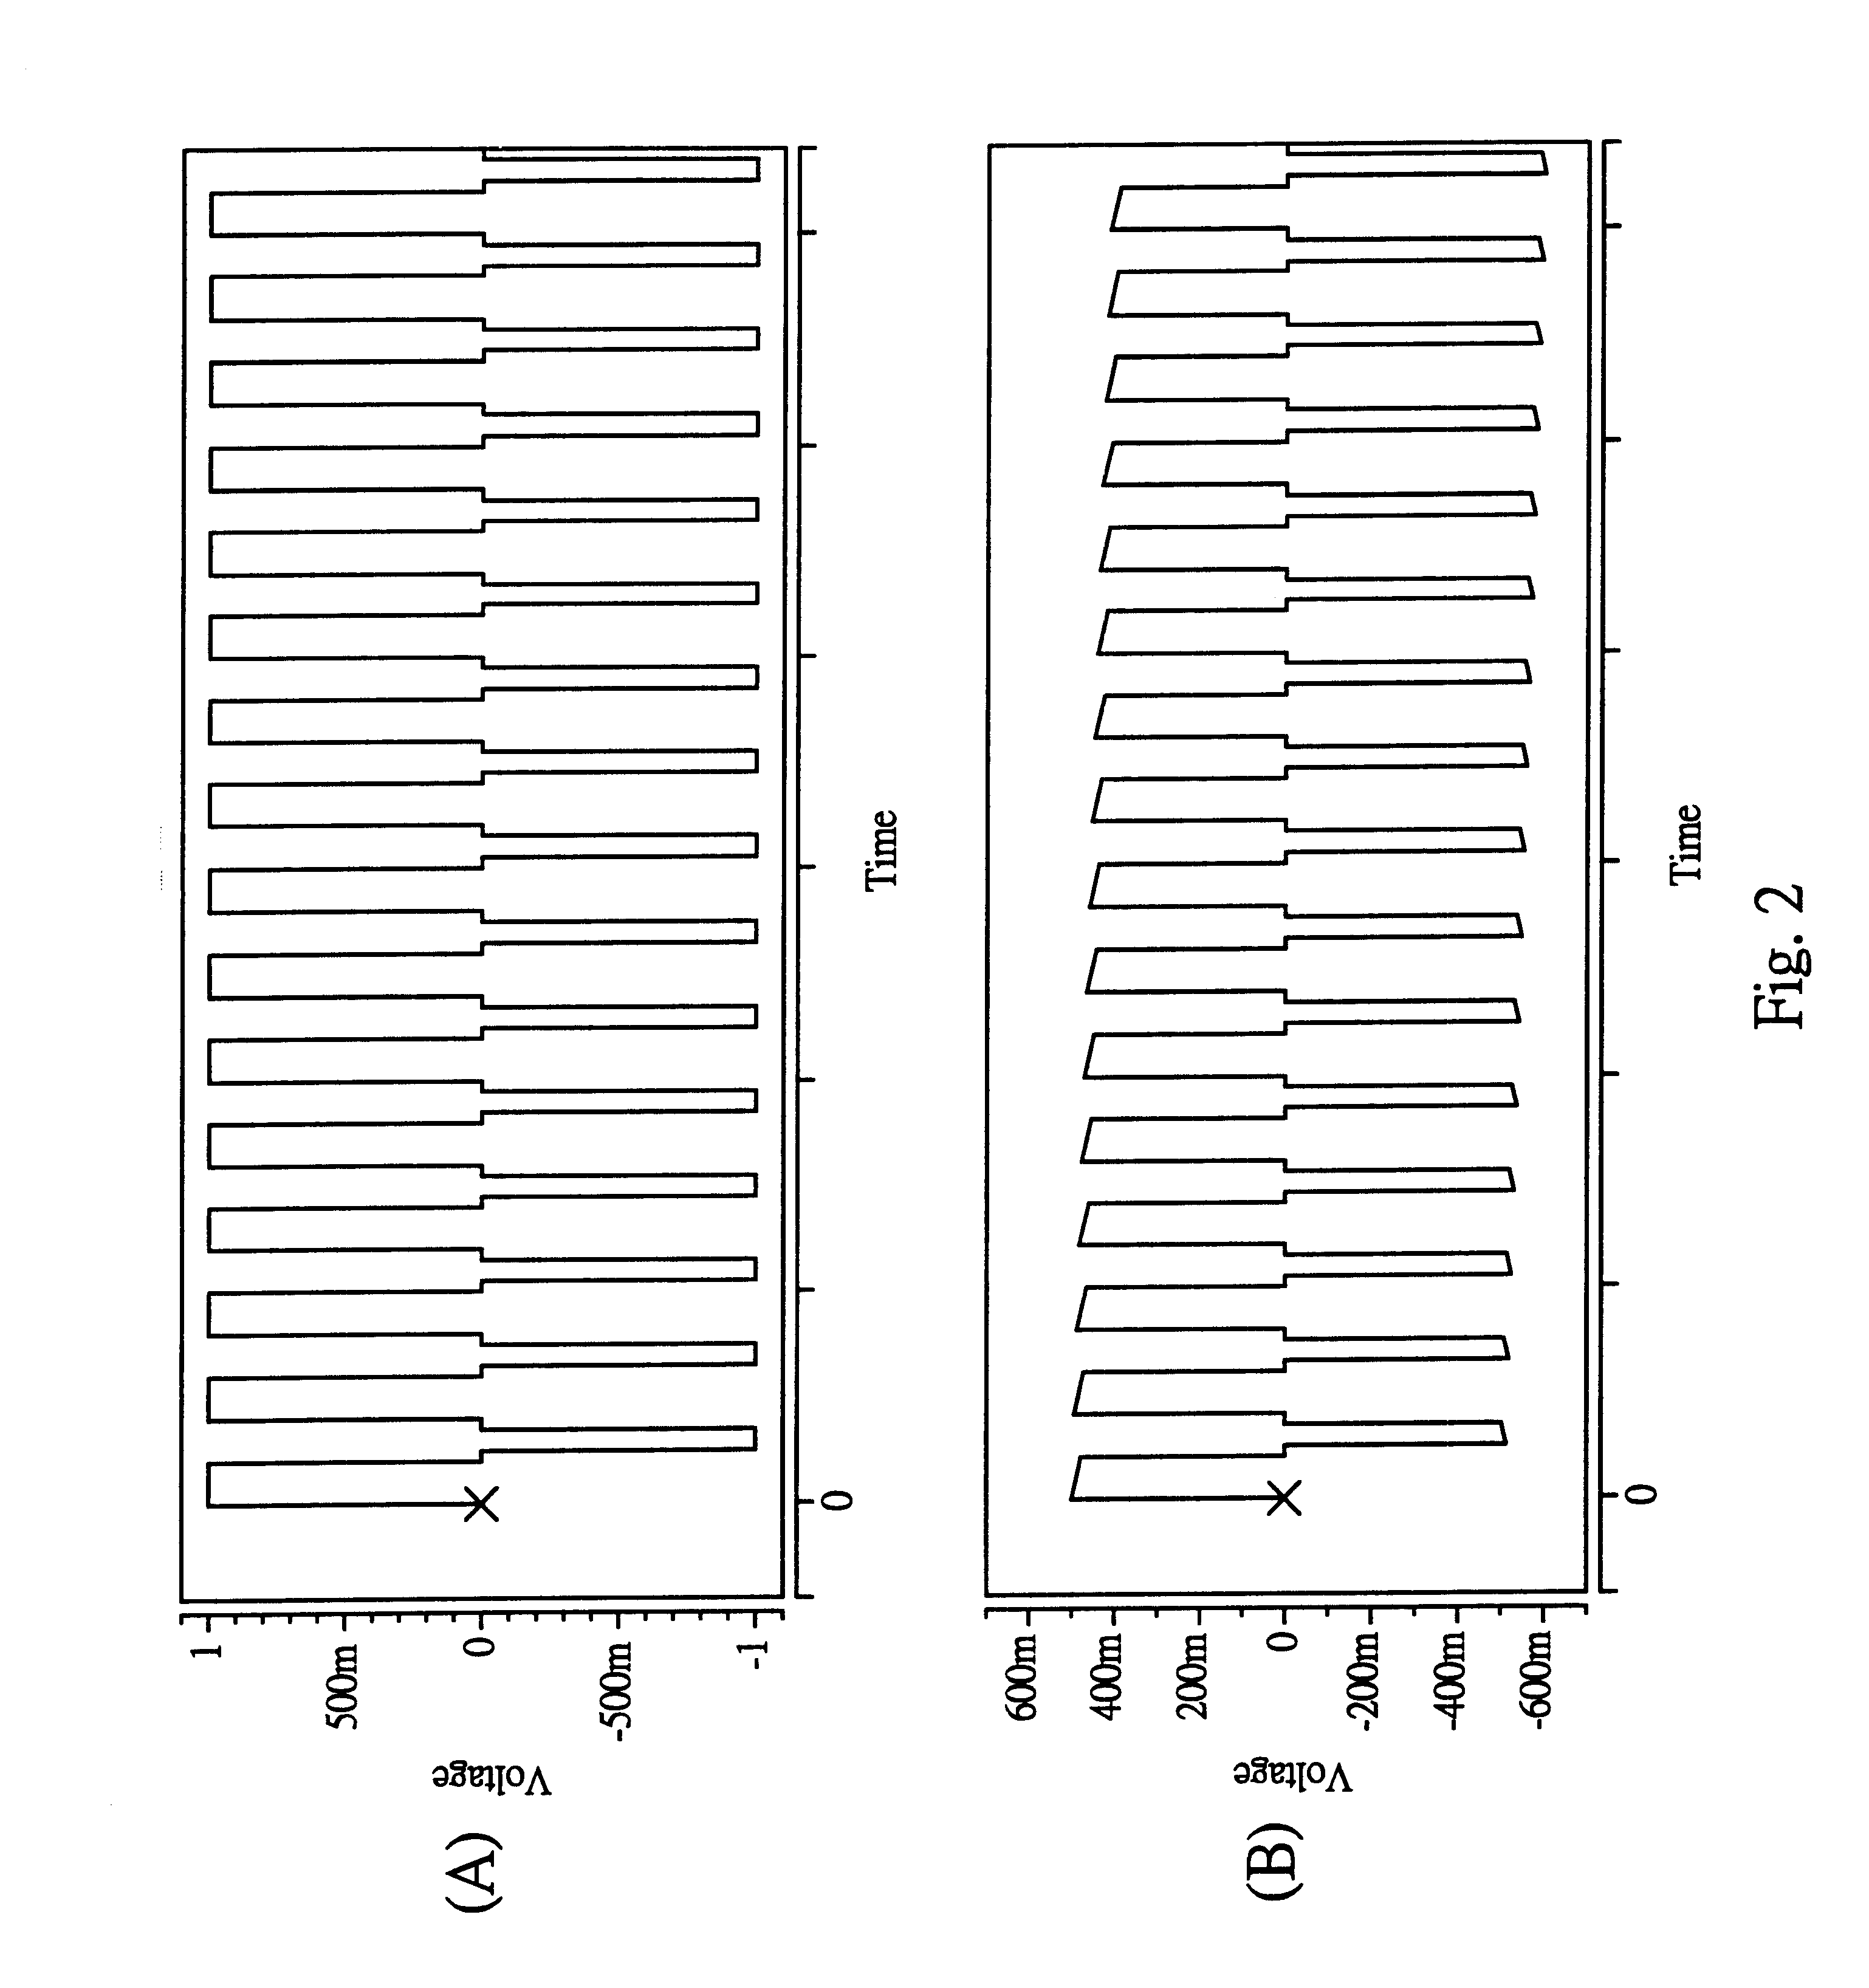 Device and method for correcting the baseline wandering of transmitting signals